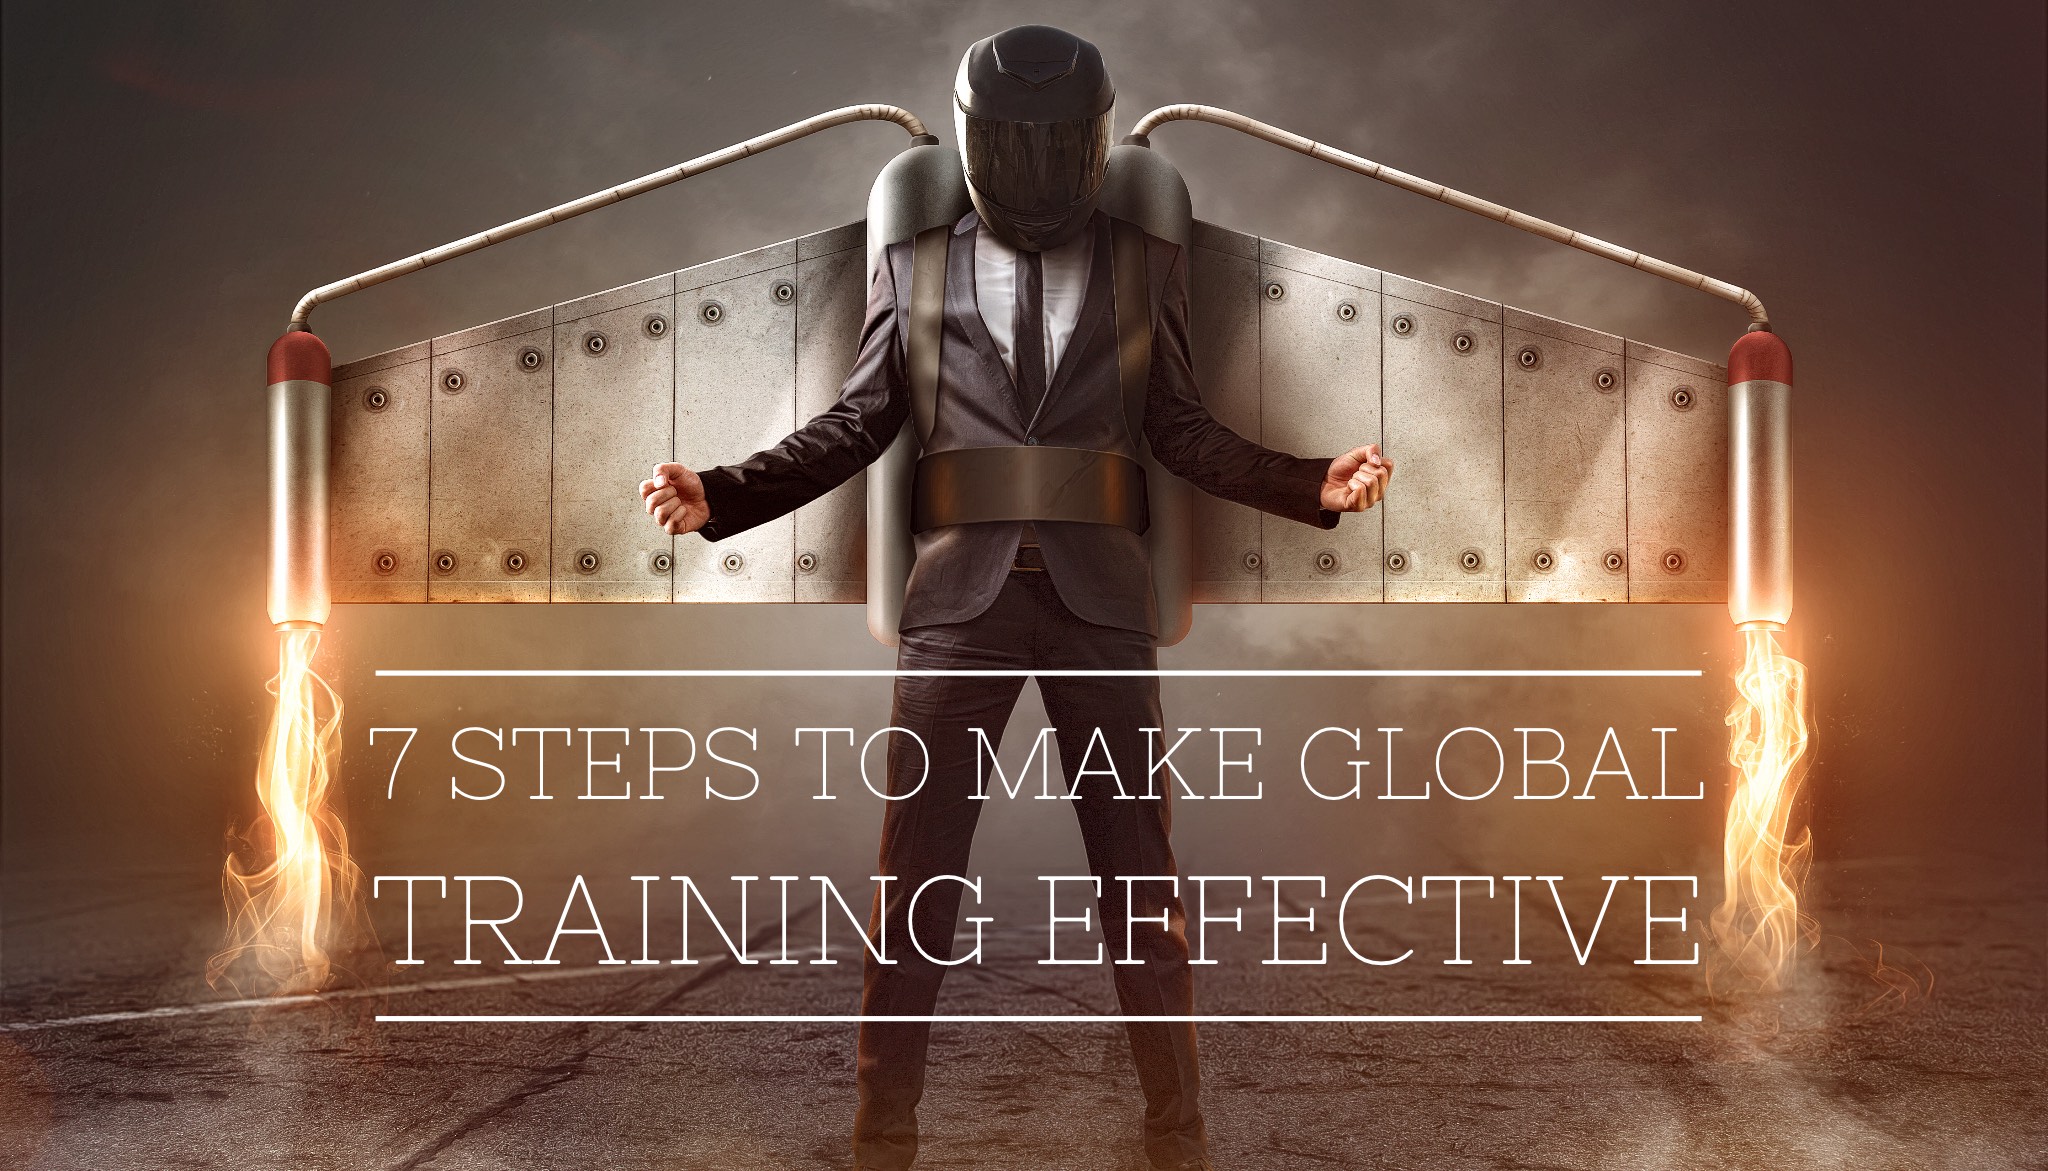 7 Steps to Make Global Training Effective Capytech